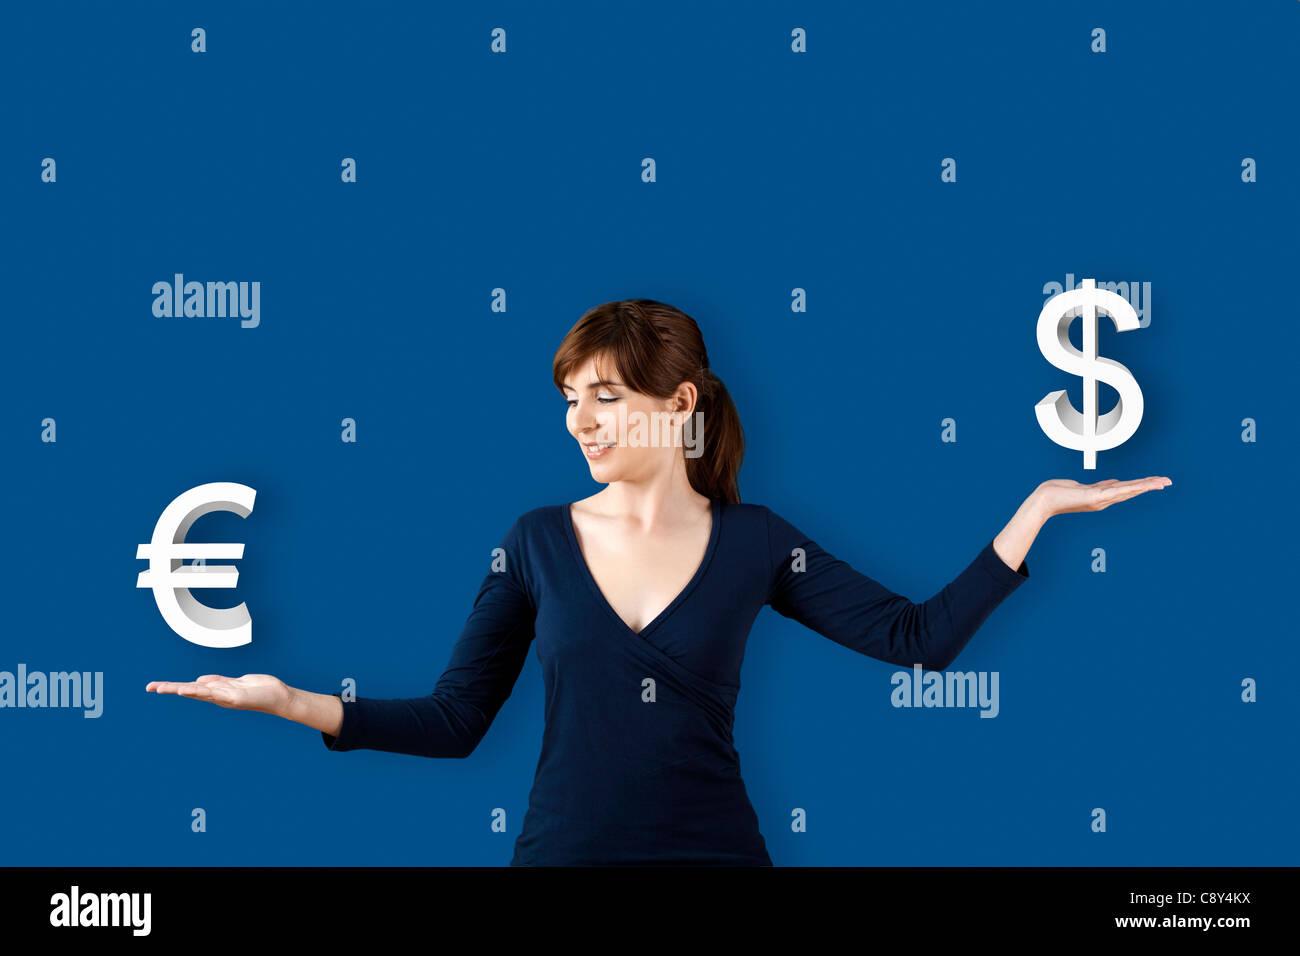 Woman making a scale with her arms and checking Euro versus Dolar Stock Photo